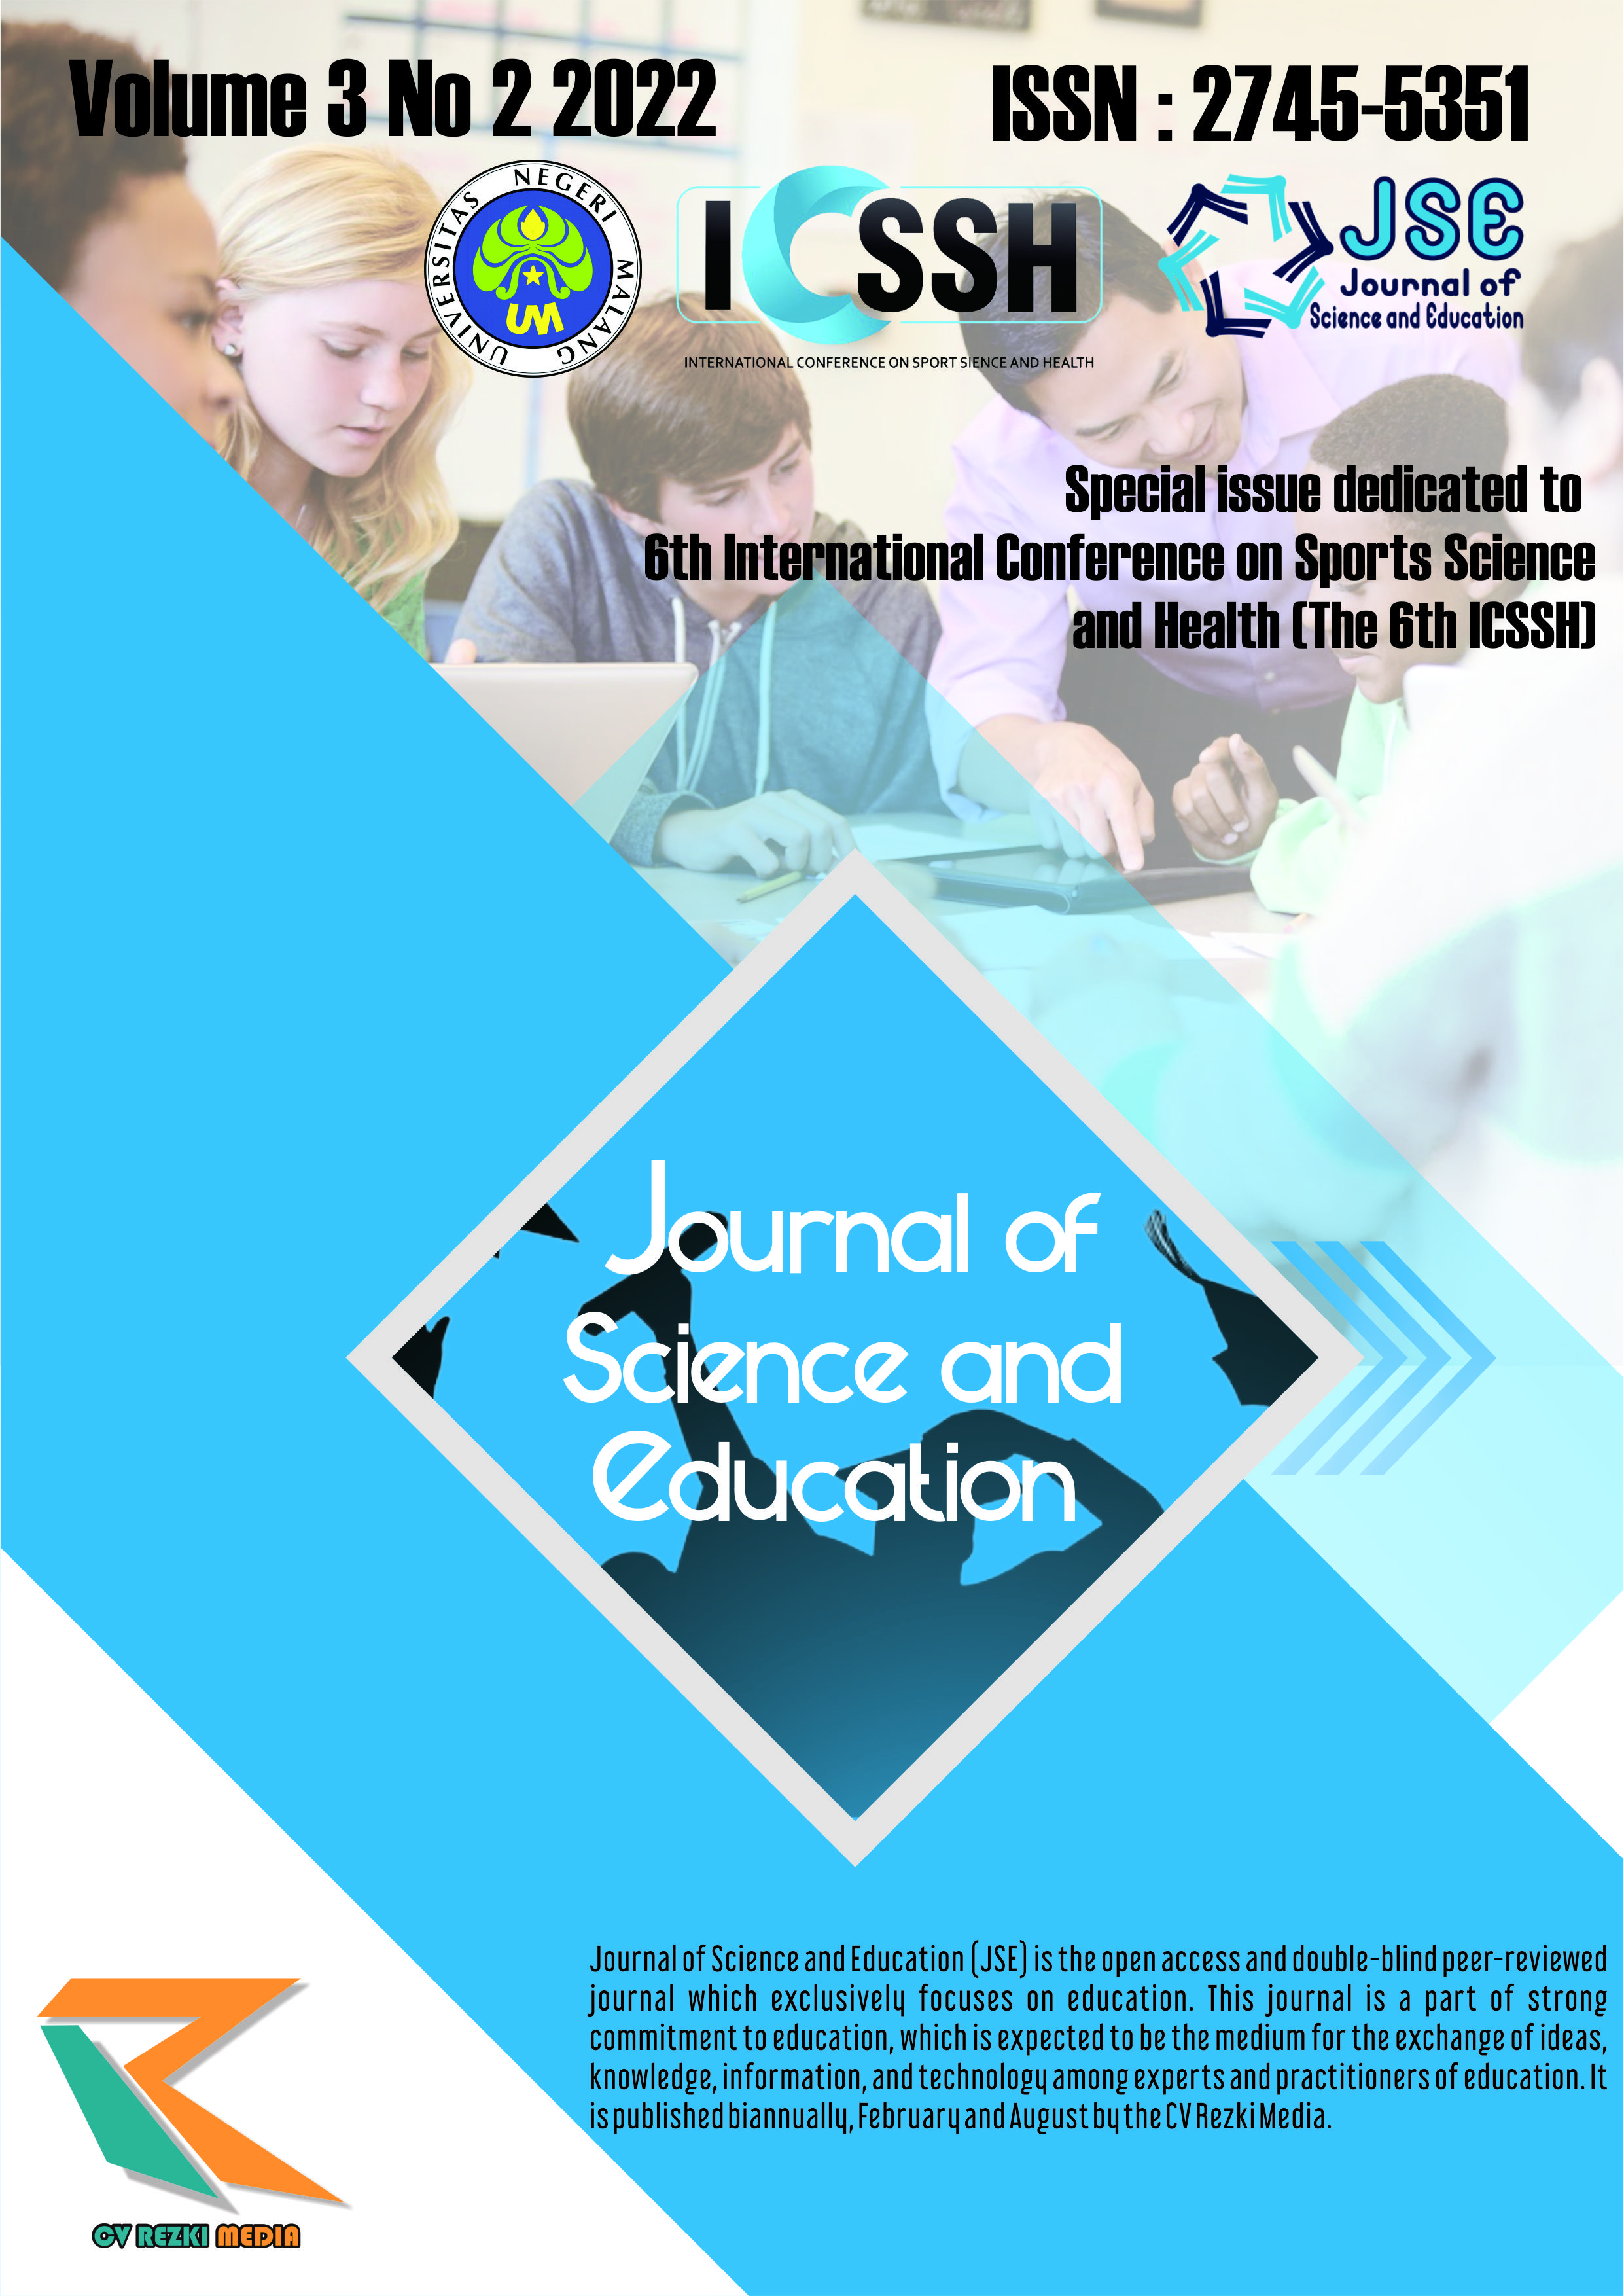 					View Vol. 3 No. 2 (2022): Special issue dedicated to International Conference on Sports Science and Health (The 6th ICSSH)
				